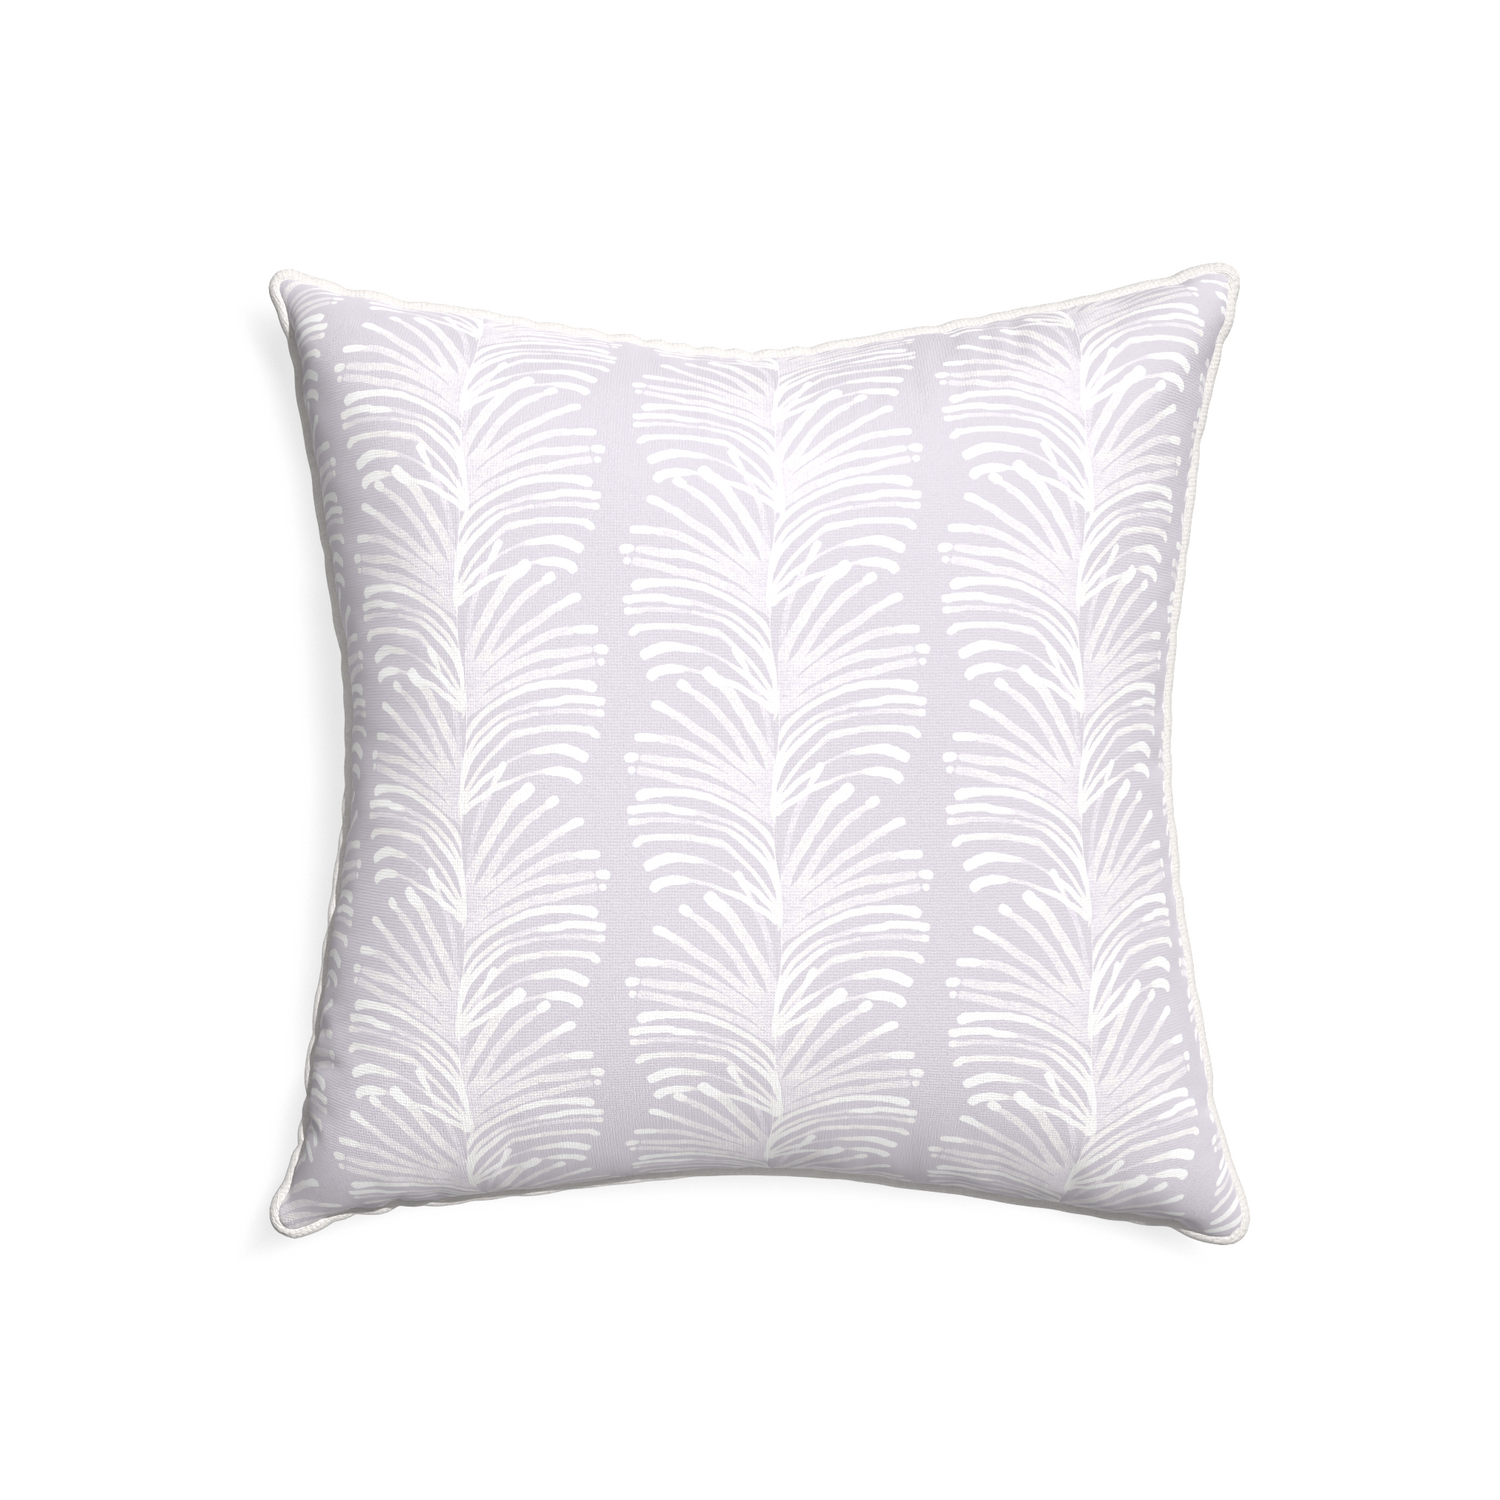 22-square emma lavender custom lavender botanical stripepillow with snow piping on white background